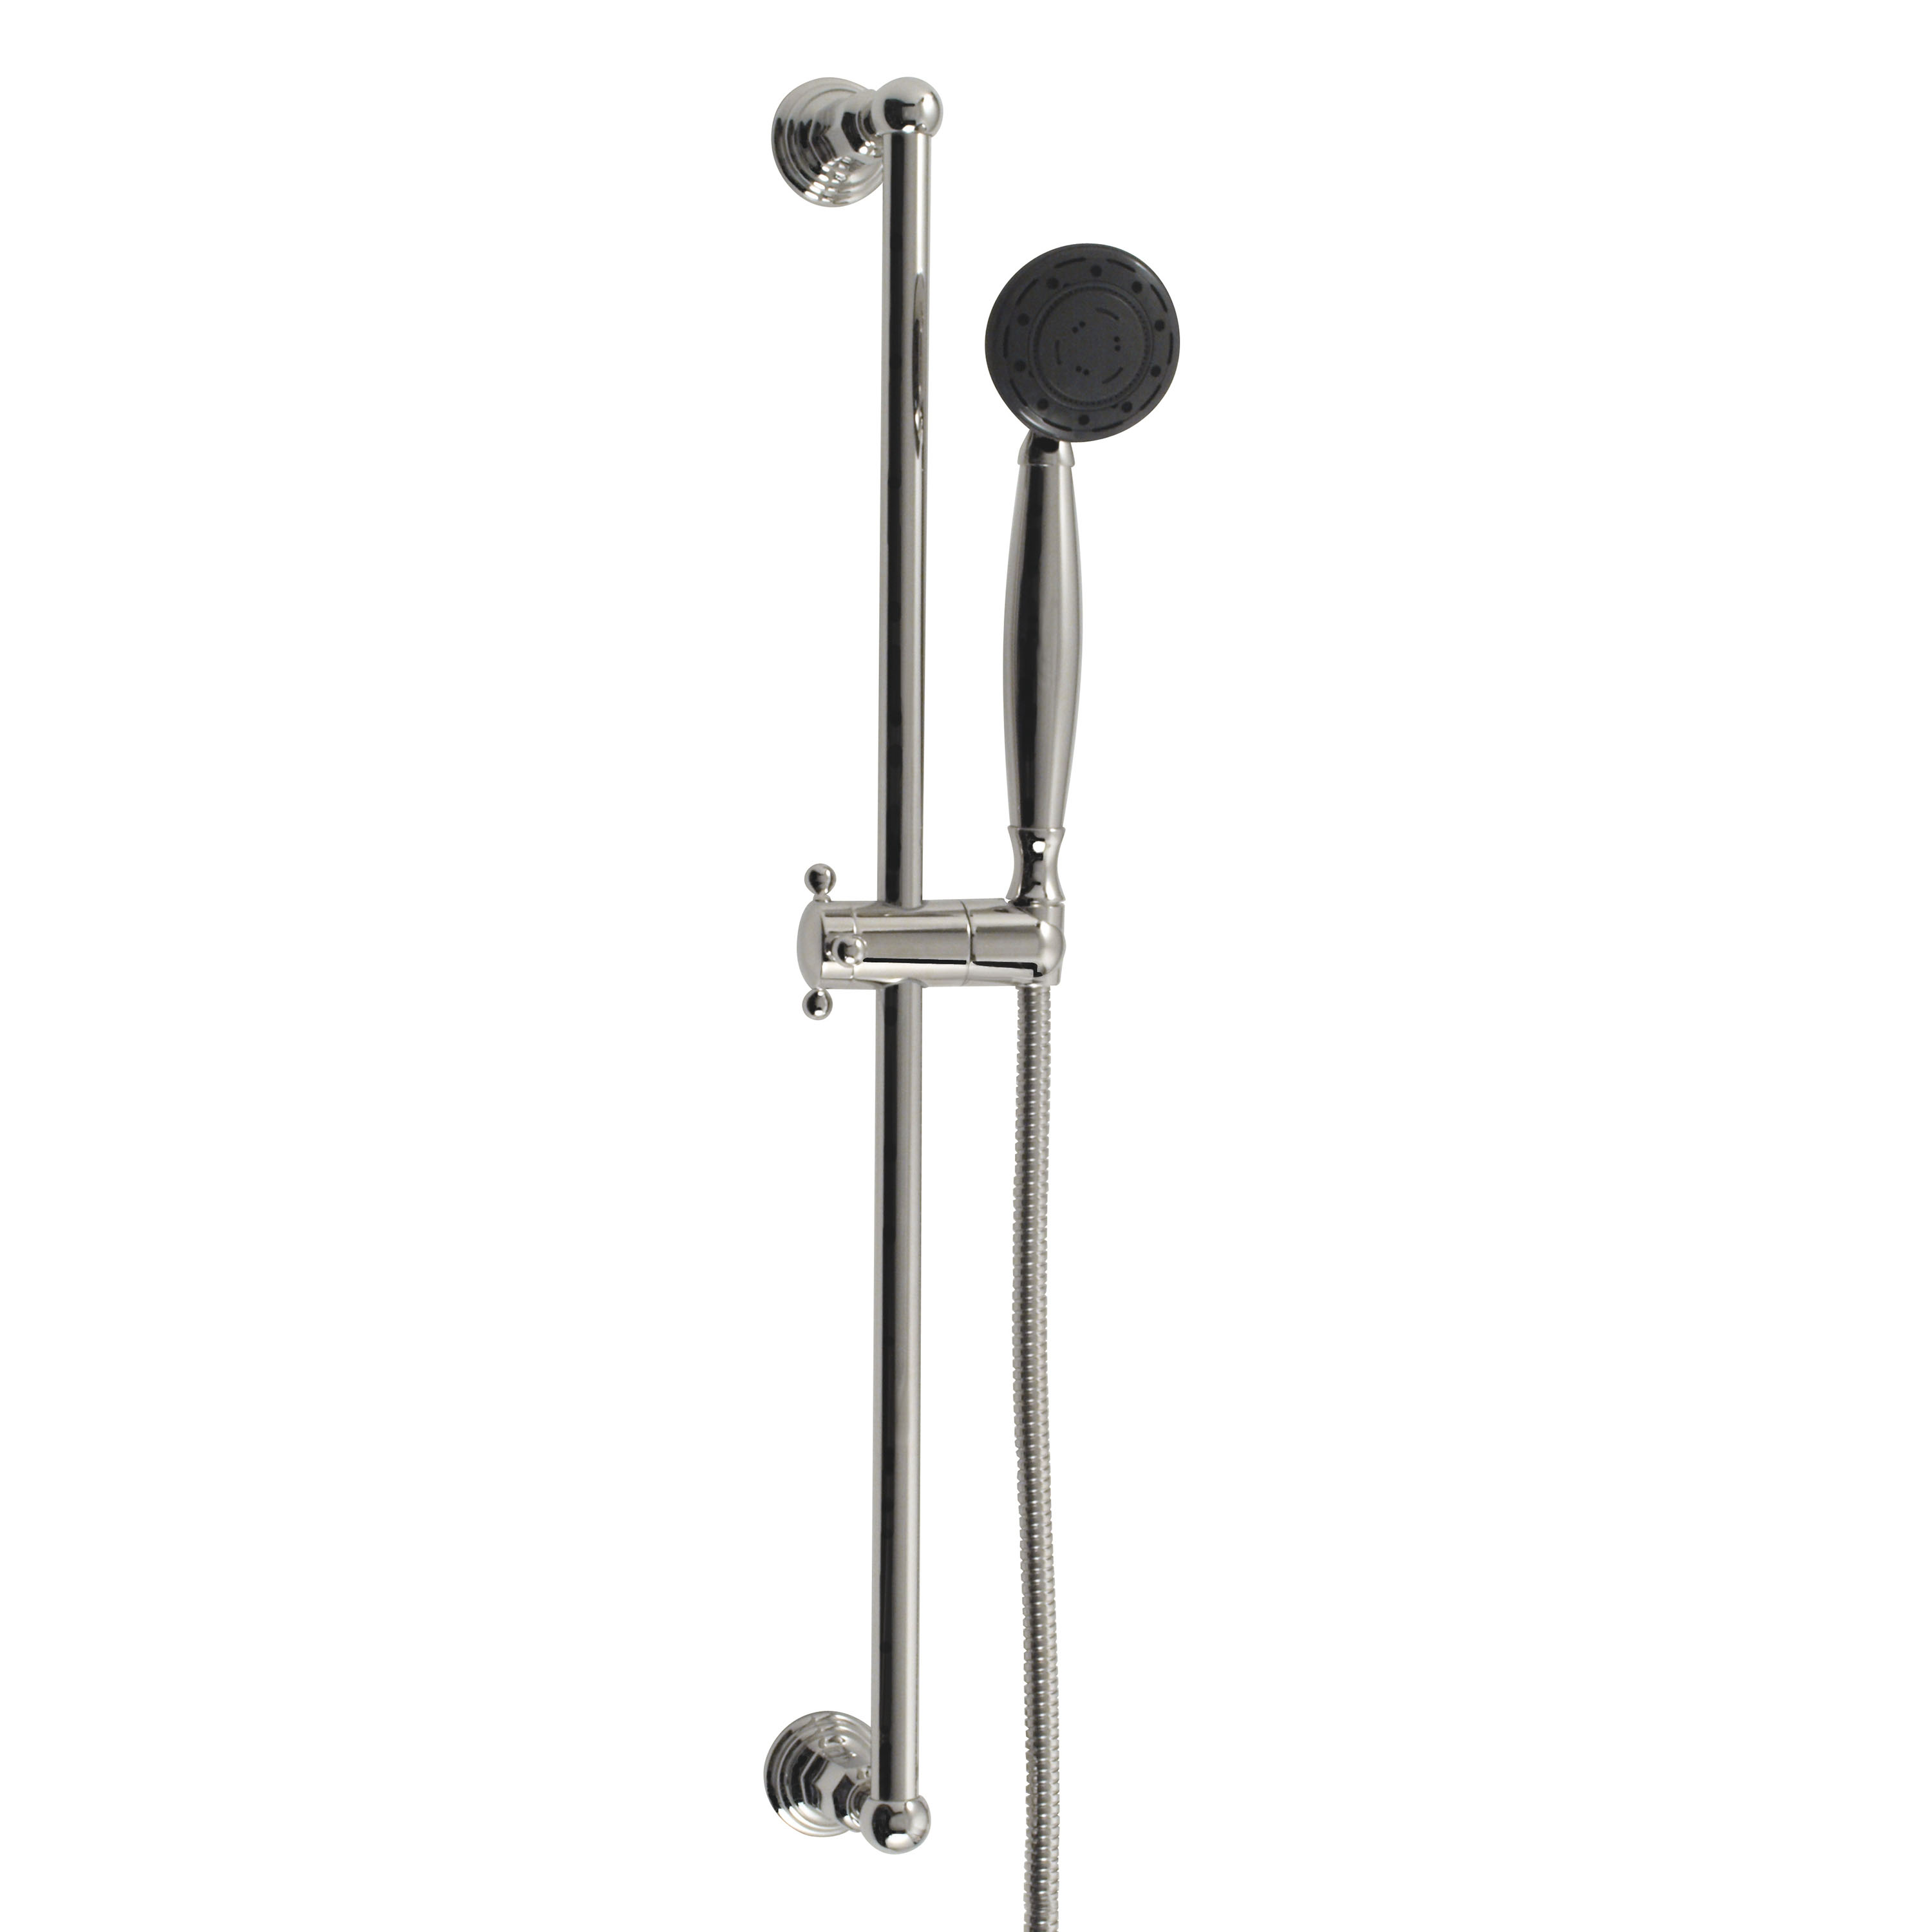 Santec 70846010 Alexis 6 Personal Shower with 6 Slide Bar Supply Elbow Included - Polished Chrome